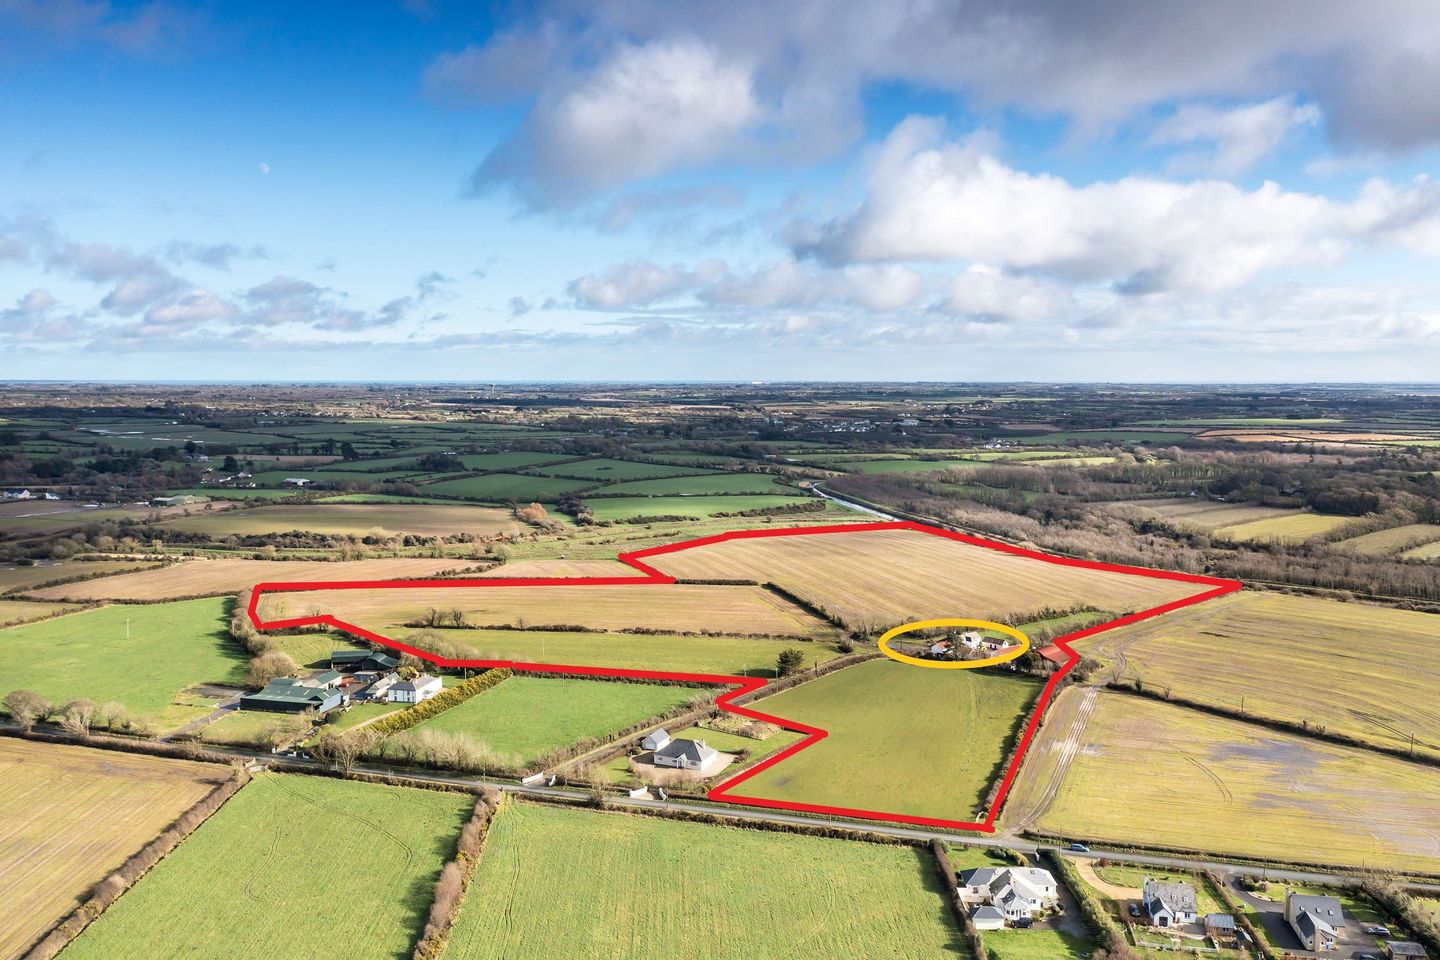 c. 38.6 Acre Non Residential Holding at Newhouse, Duncormick, Co. Wexford